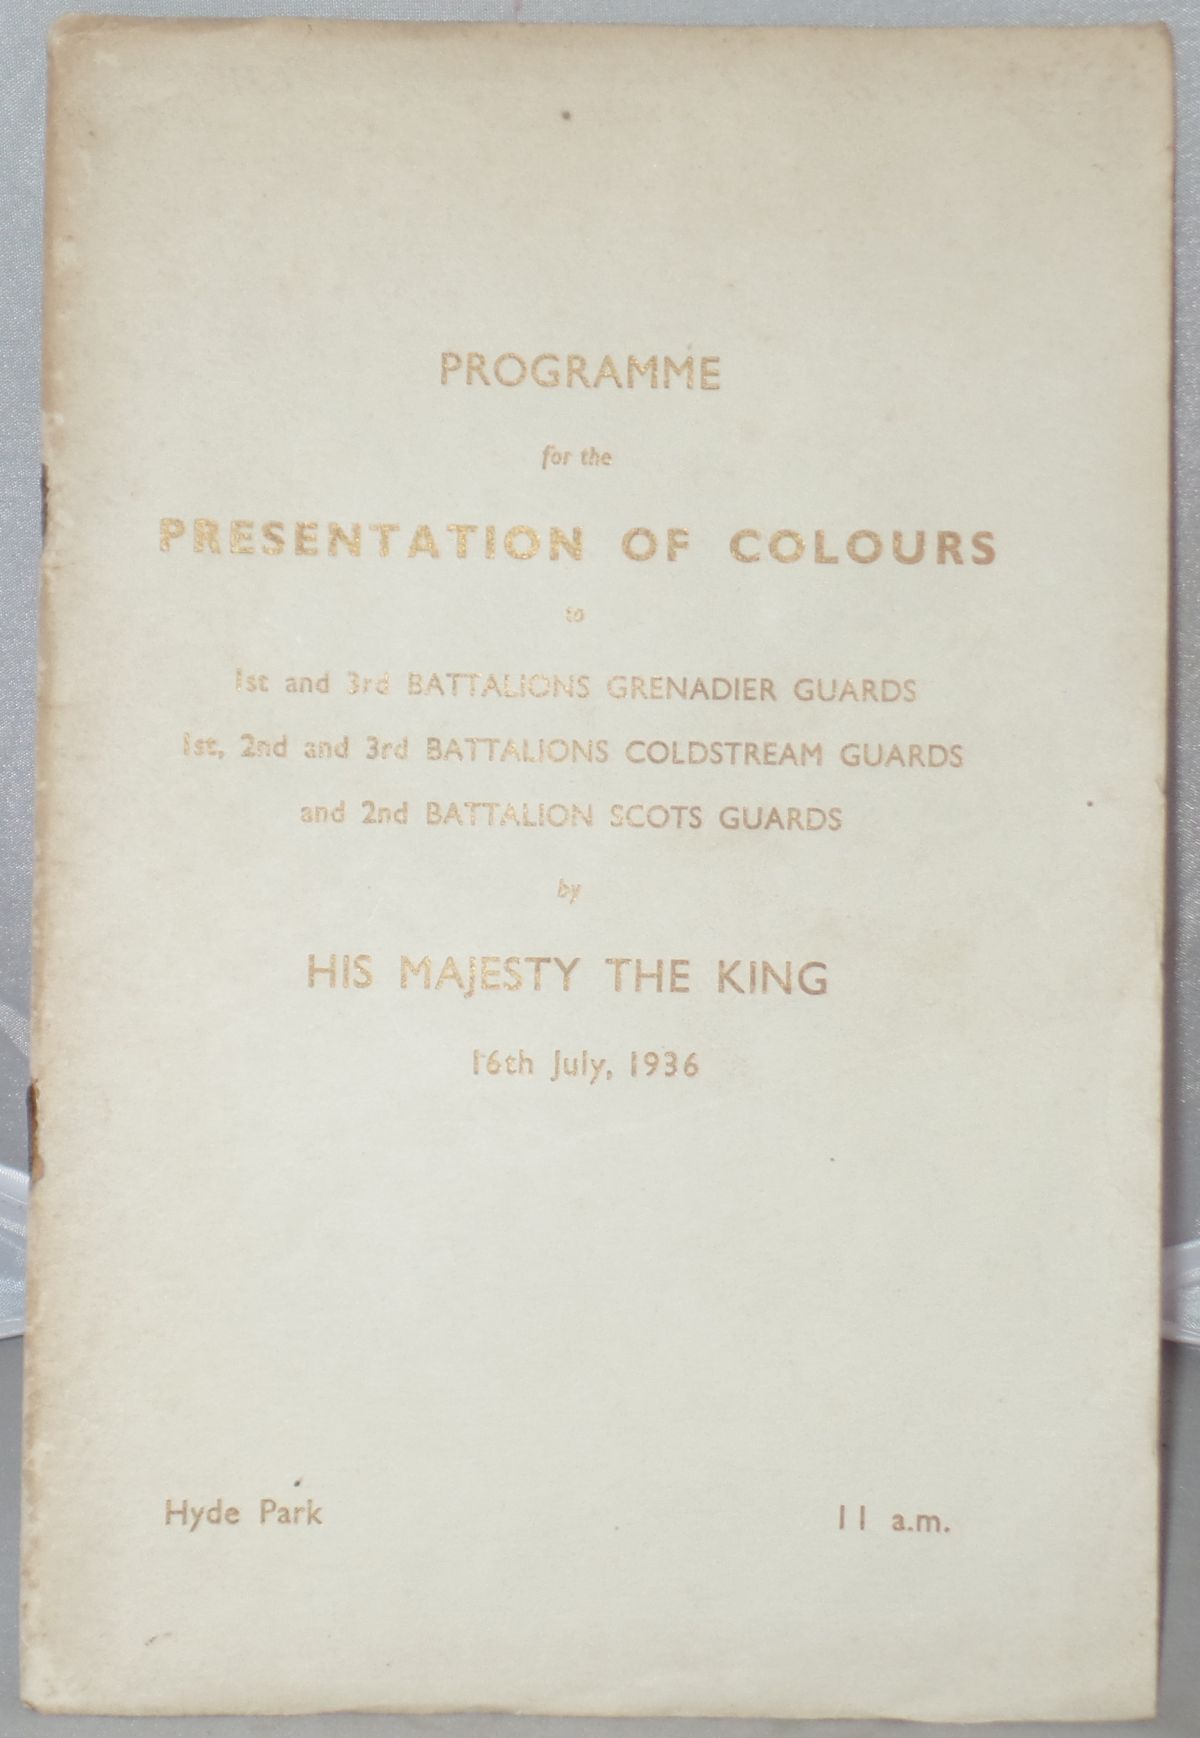 Image for Programme for the Presentation of Colours to 1st and 3rd Battalions Grenadier Guards, 1st, 2nd and 3rd Battalions Coldstream Guards and 2nd Battalion Scots Guards